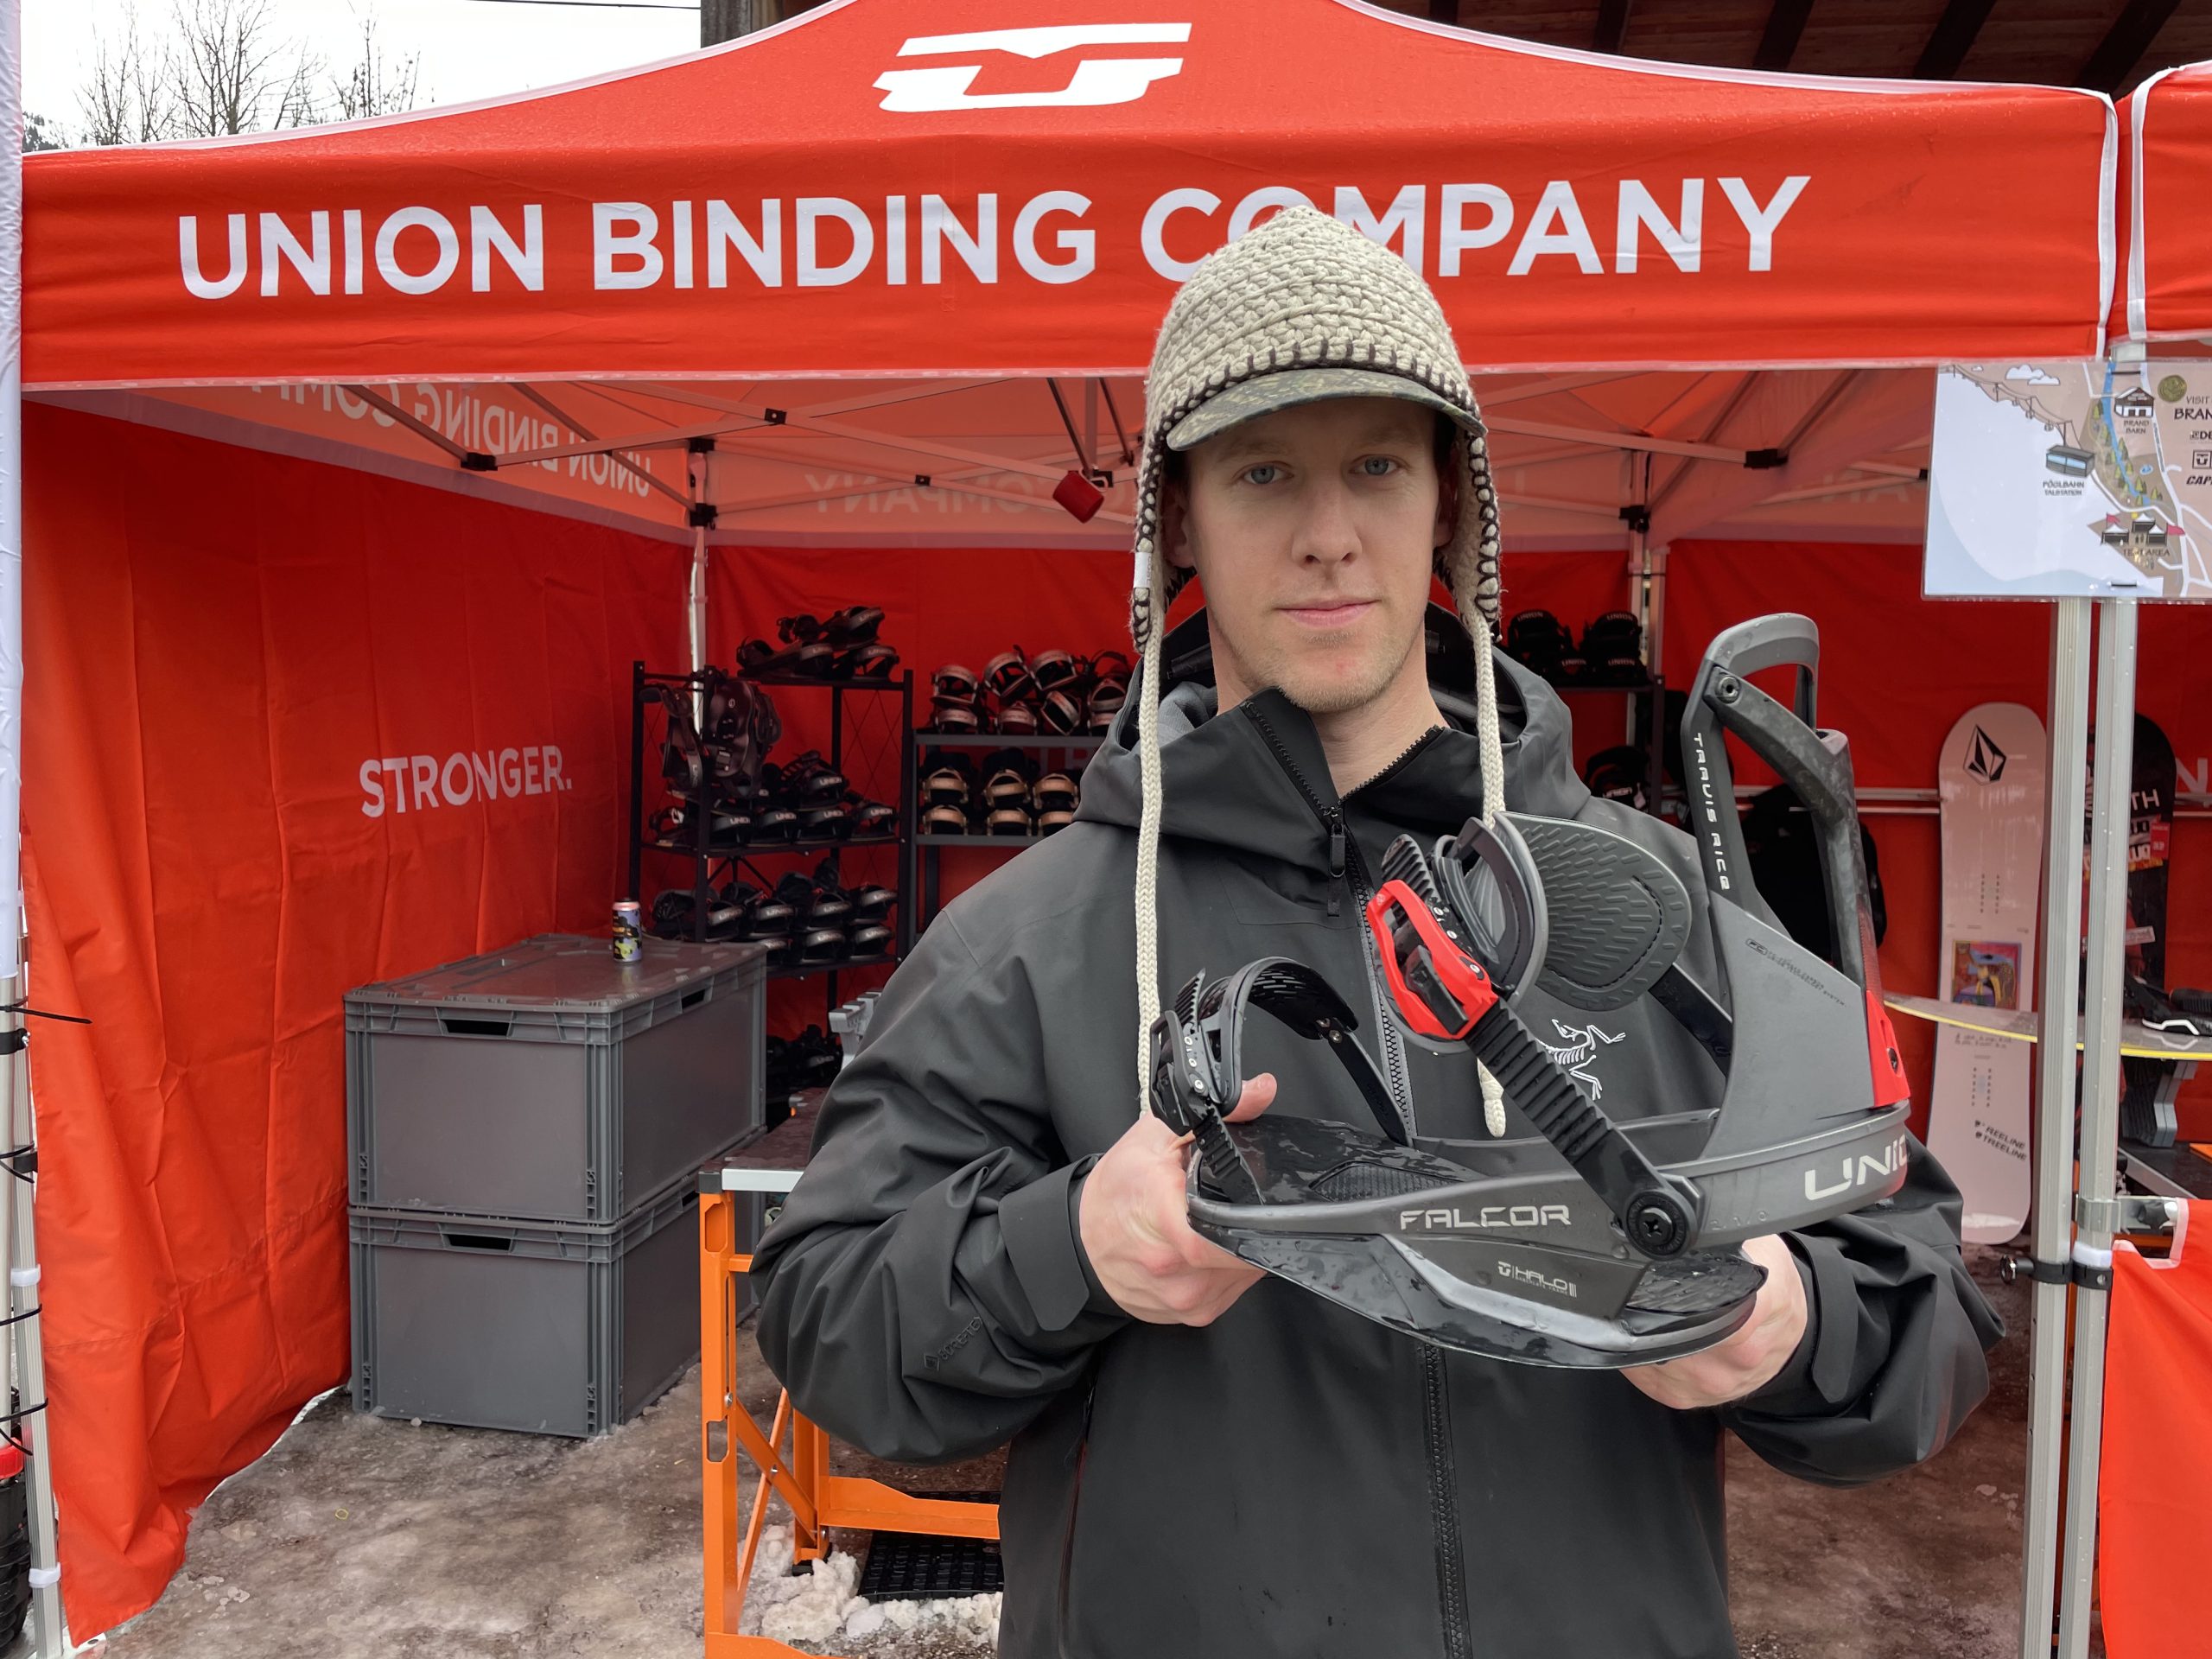 Union’s Riley Goodwin with the new Falcor Travis Rice pro model with 2 layer baseplate